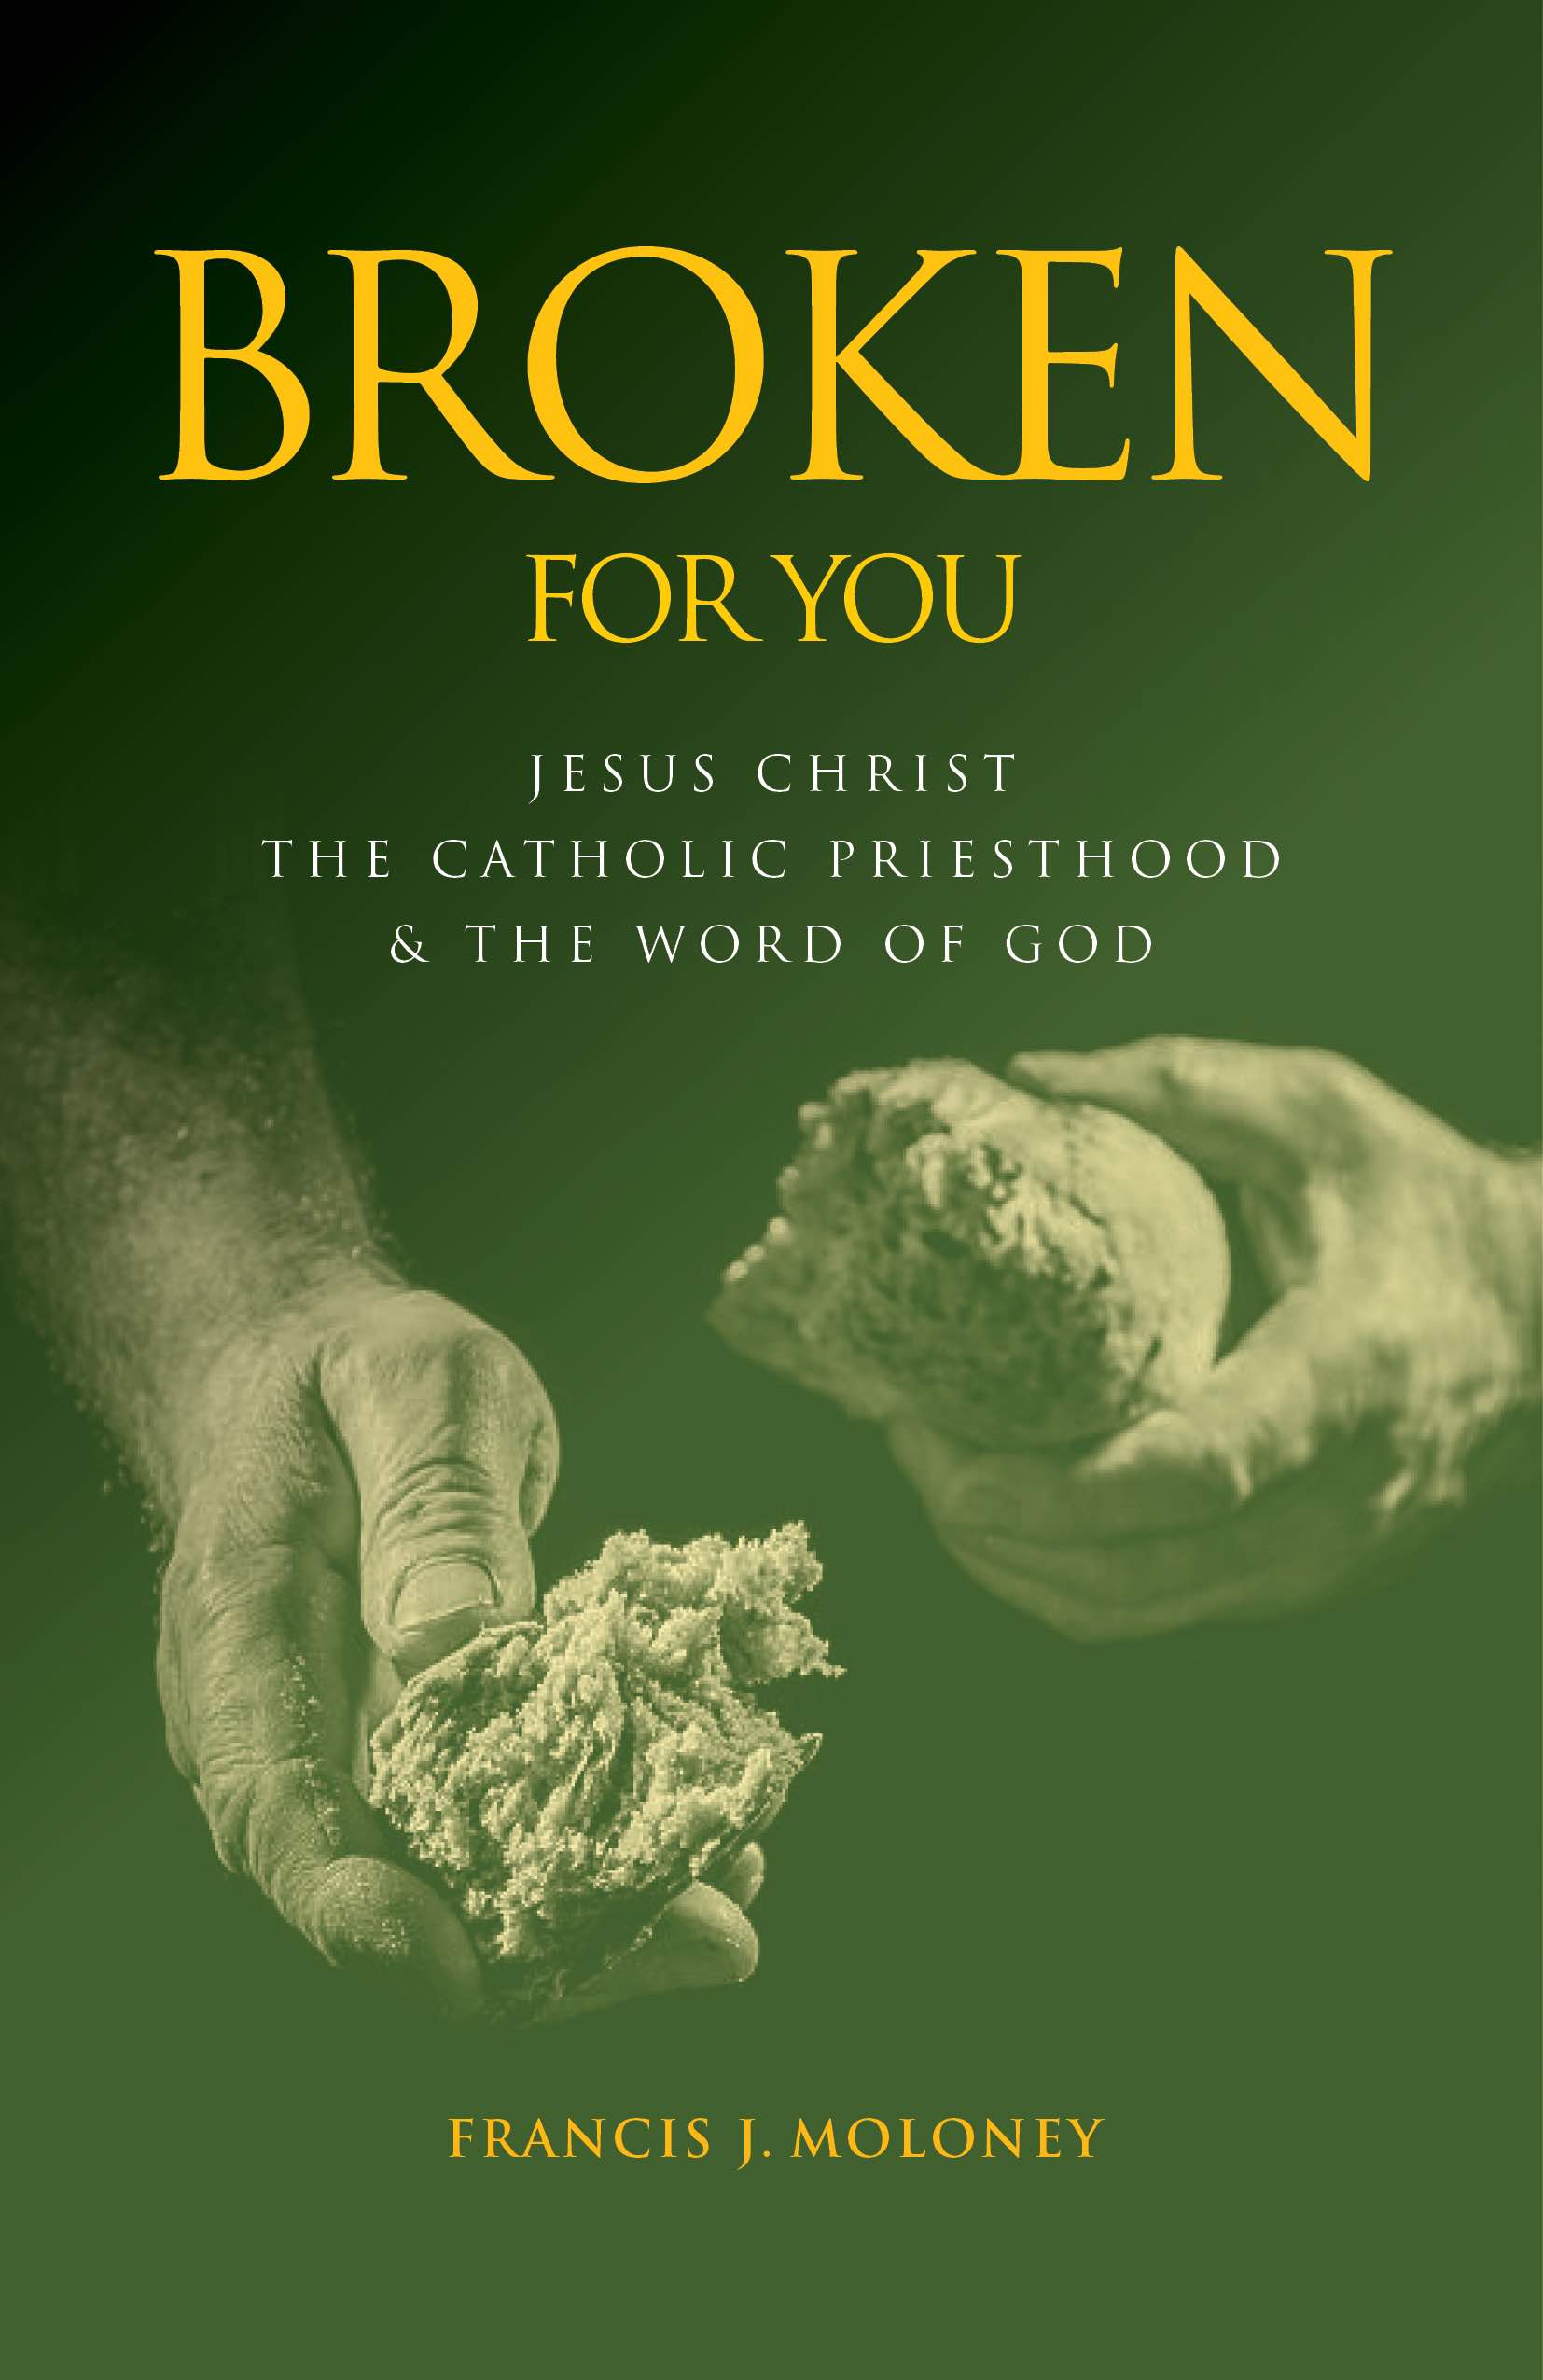 Broken For You  Jesus Christ the Catholic Priesthood & the Word of God / Francis Moloney